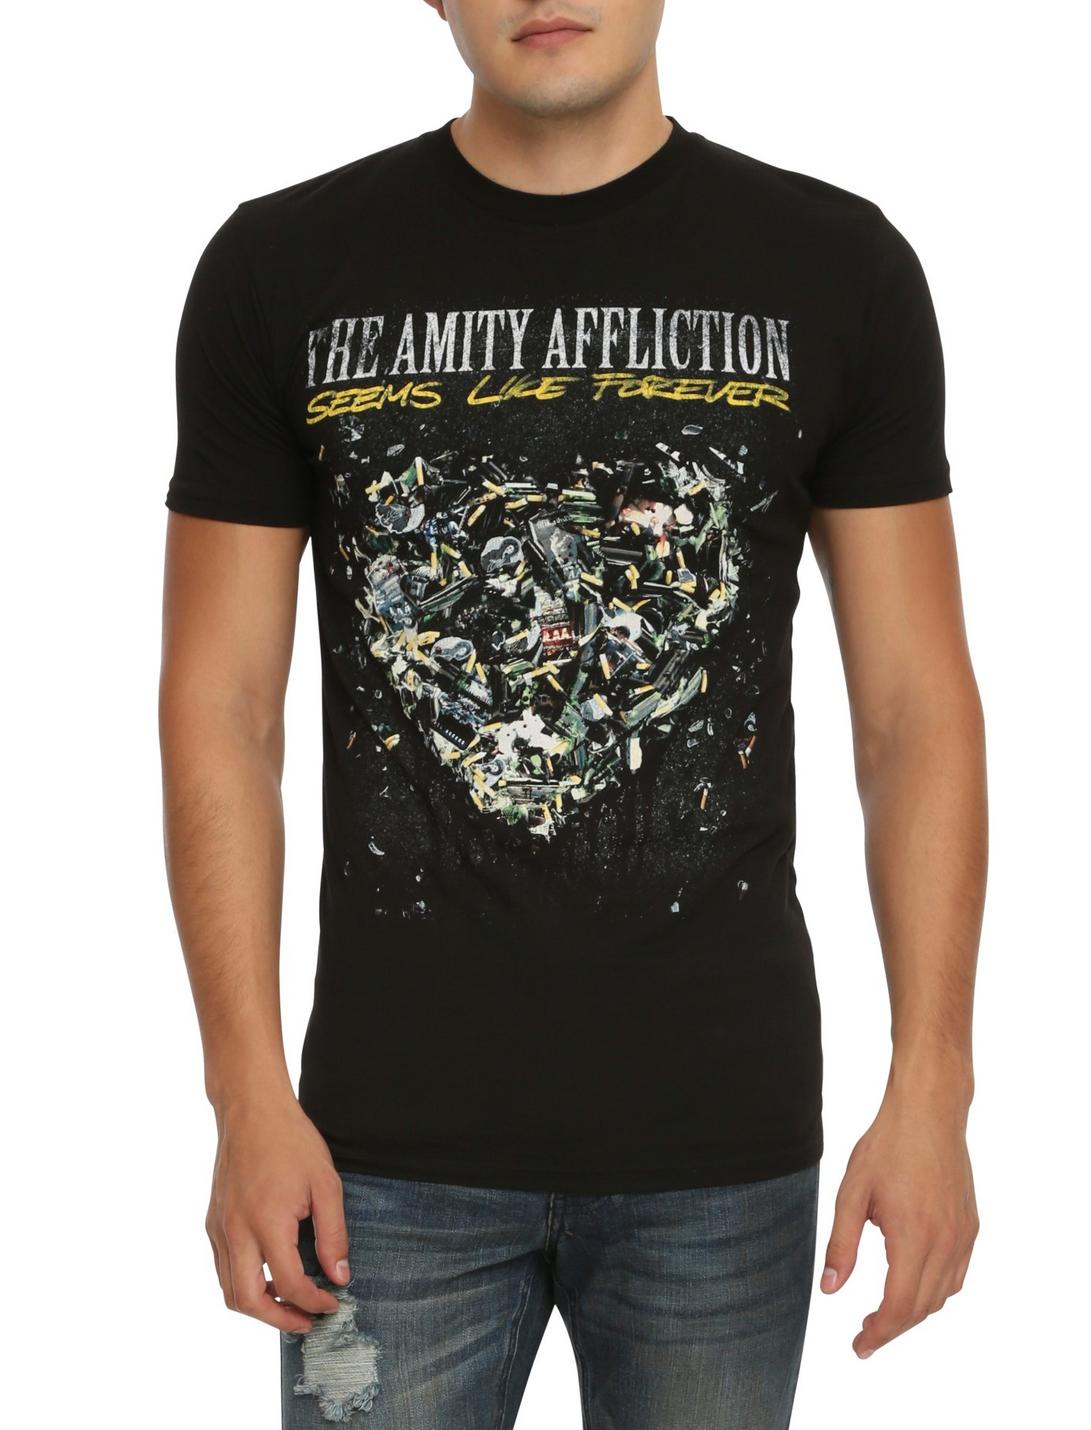 The Amity Affliction Seems Like Forever T-Shirt, BLACK, hi-res